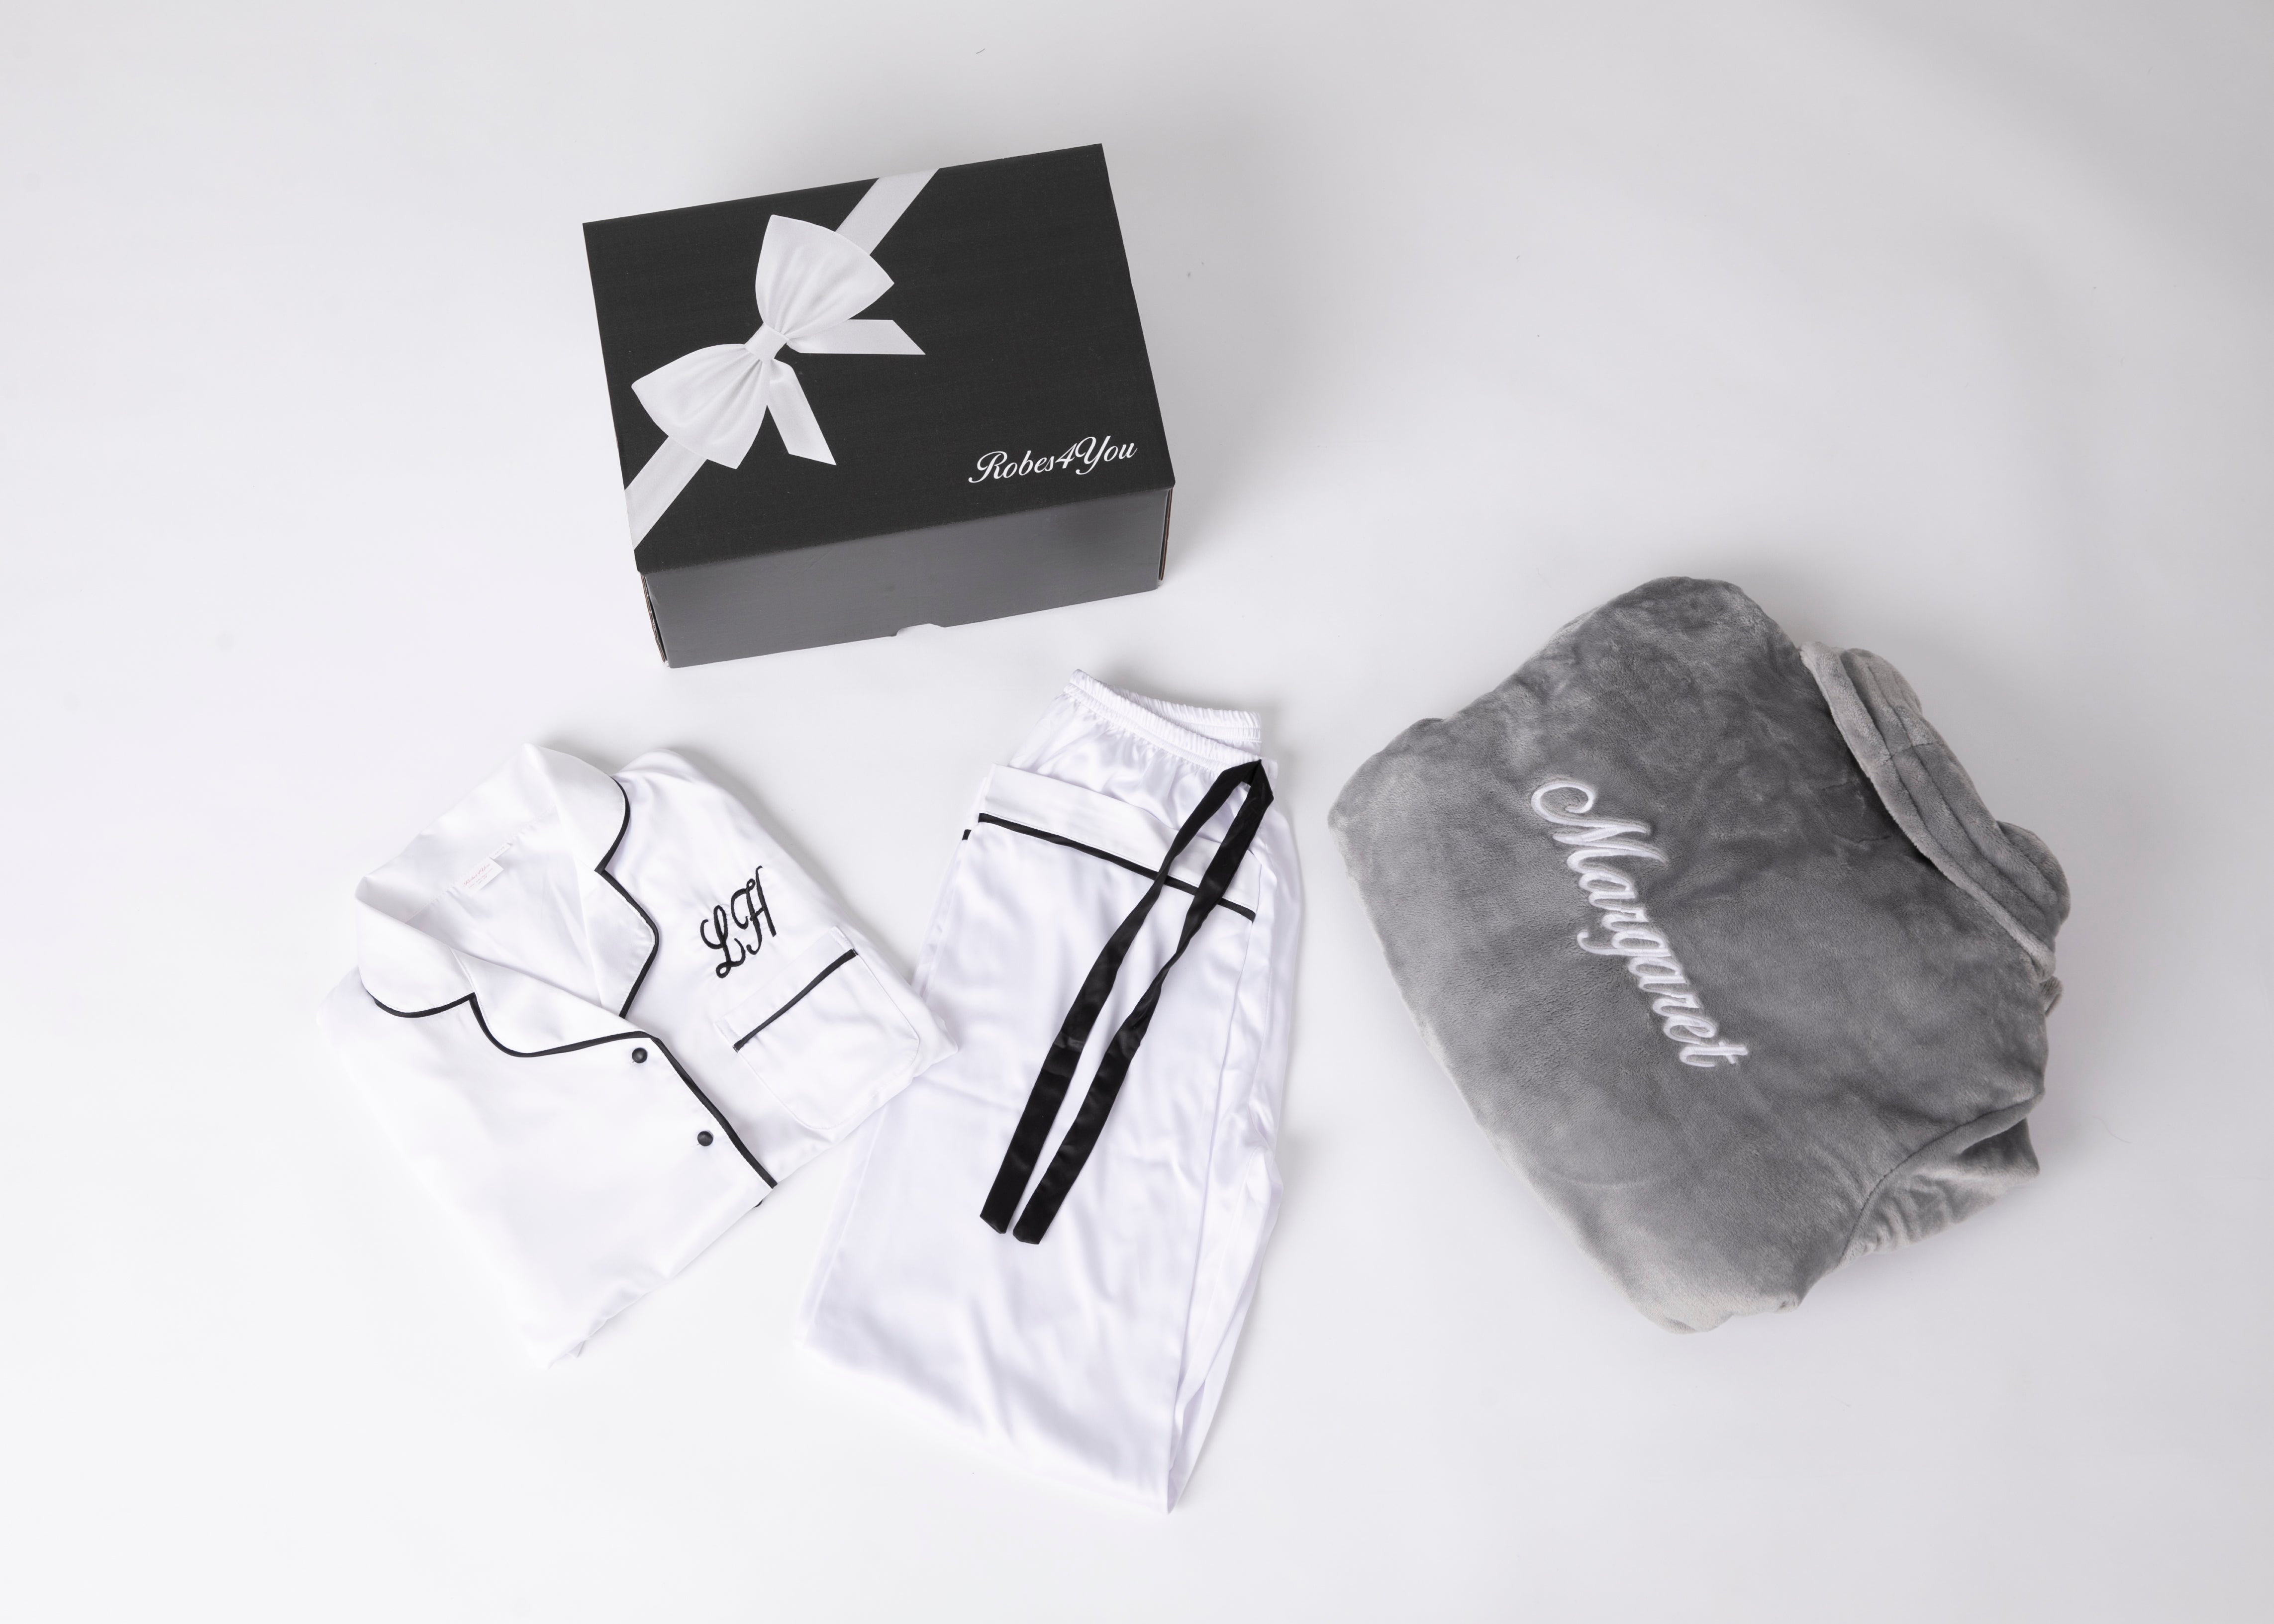 Luxurious Soft Fluffy Robe and Long Satin pyjamas presented in a gift box